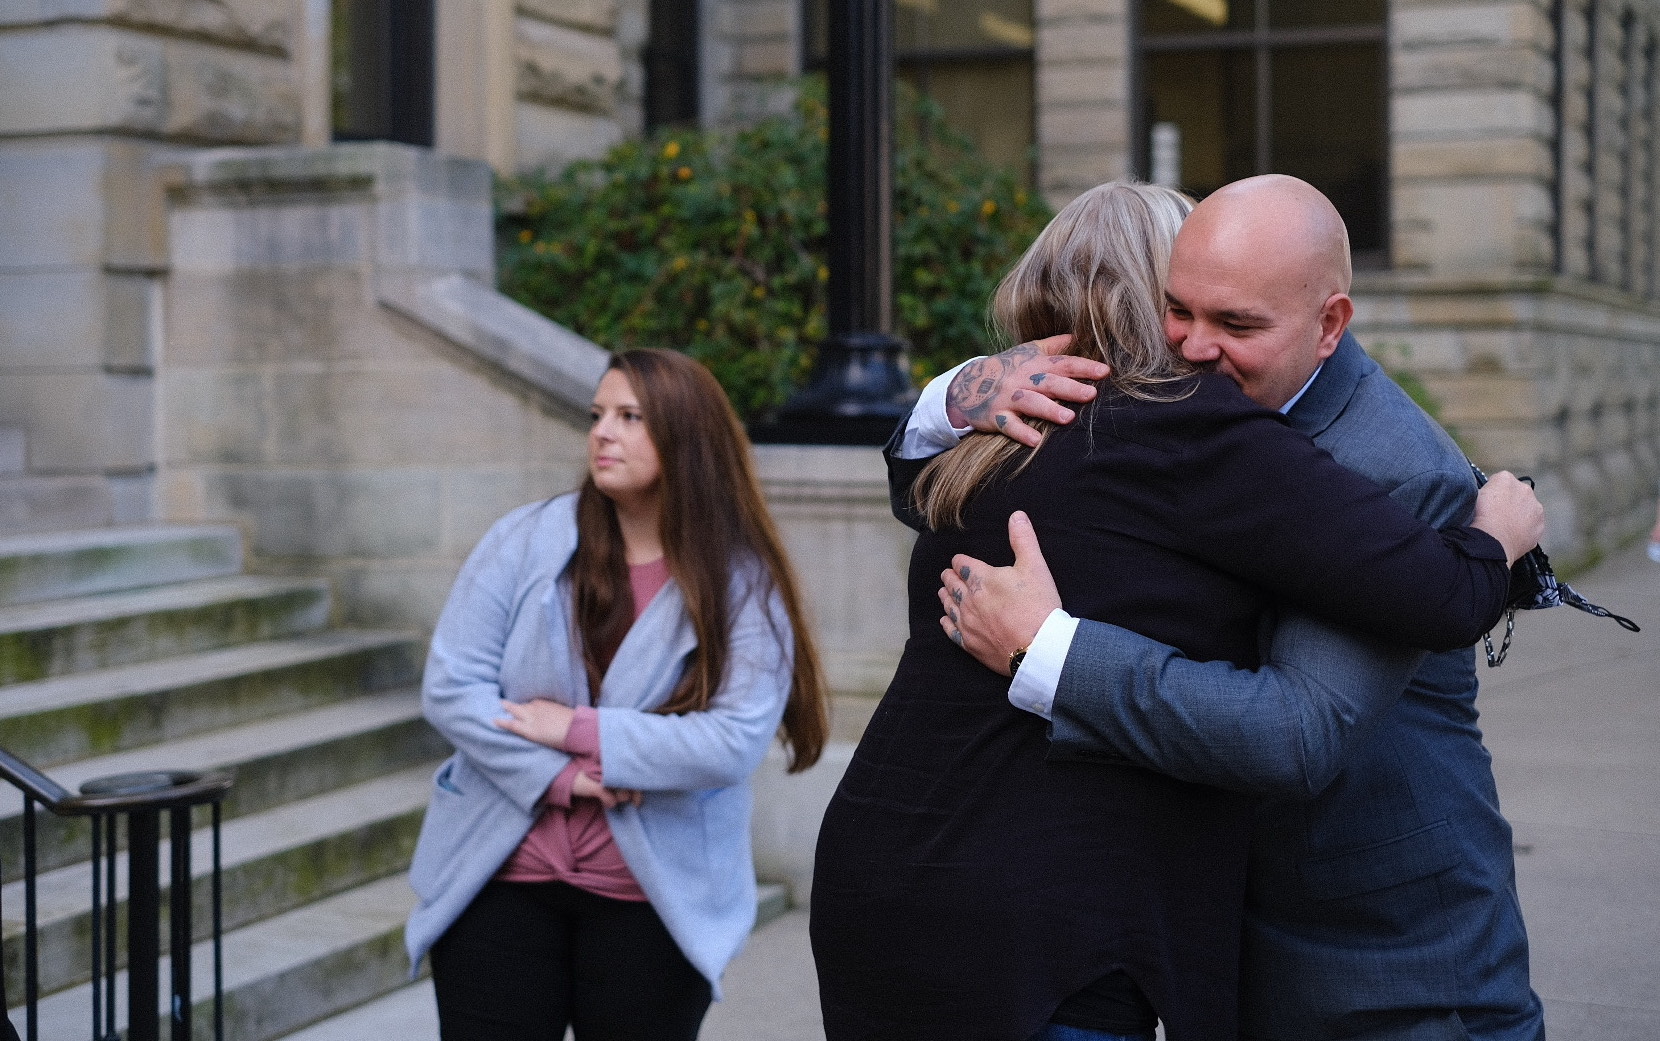 Philip Barnett after his exoneration in West Virginia on Oct. 5, 2021 (Image: Chris Jackson for AP Images/Innocence Project).